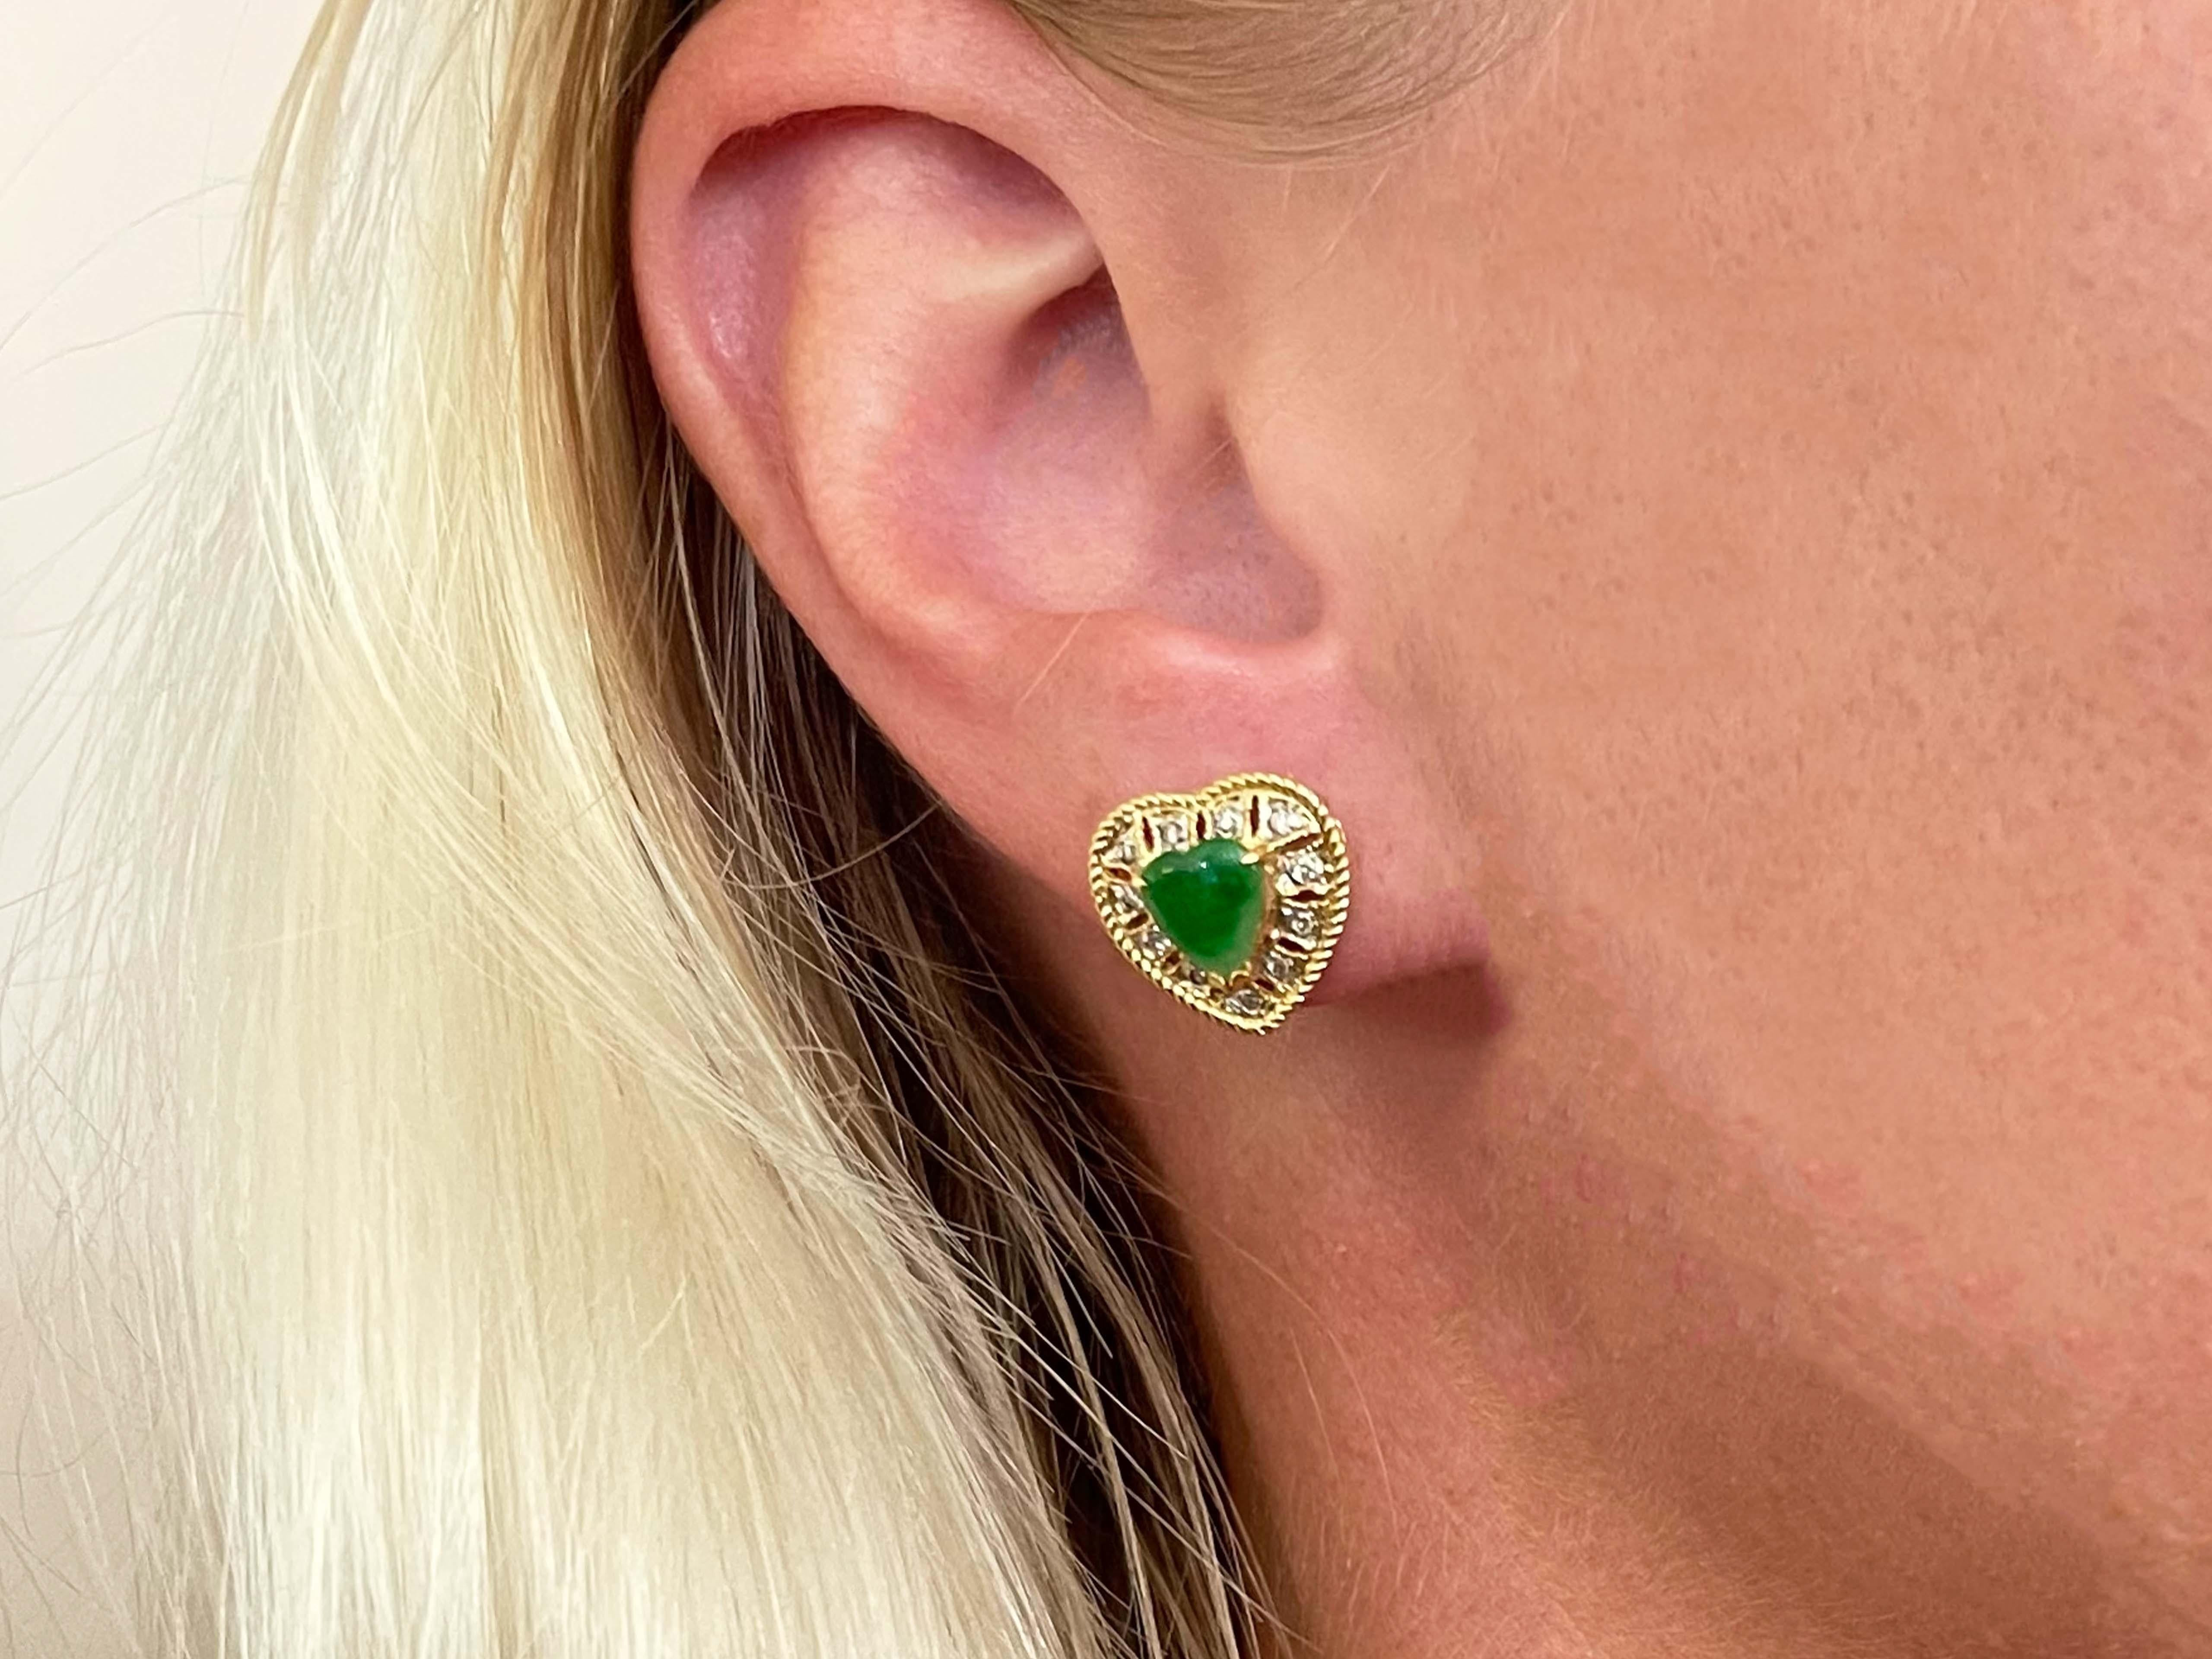 Earrings Specifications:

Metal: 18K Yellow Gold

Total Weight: 3.6 Grams
​
​Earring Measurements: 13 x 13.6 mm
Jade Measurements: 6.7 x 5.95 x 1.70 mm
​
Total ​Jade Carat Weight: 0.72 carats

Diamond Count: 22

Diamond Color: I-J

Diamond Clarity: